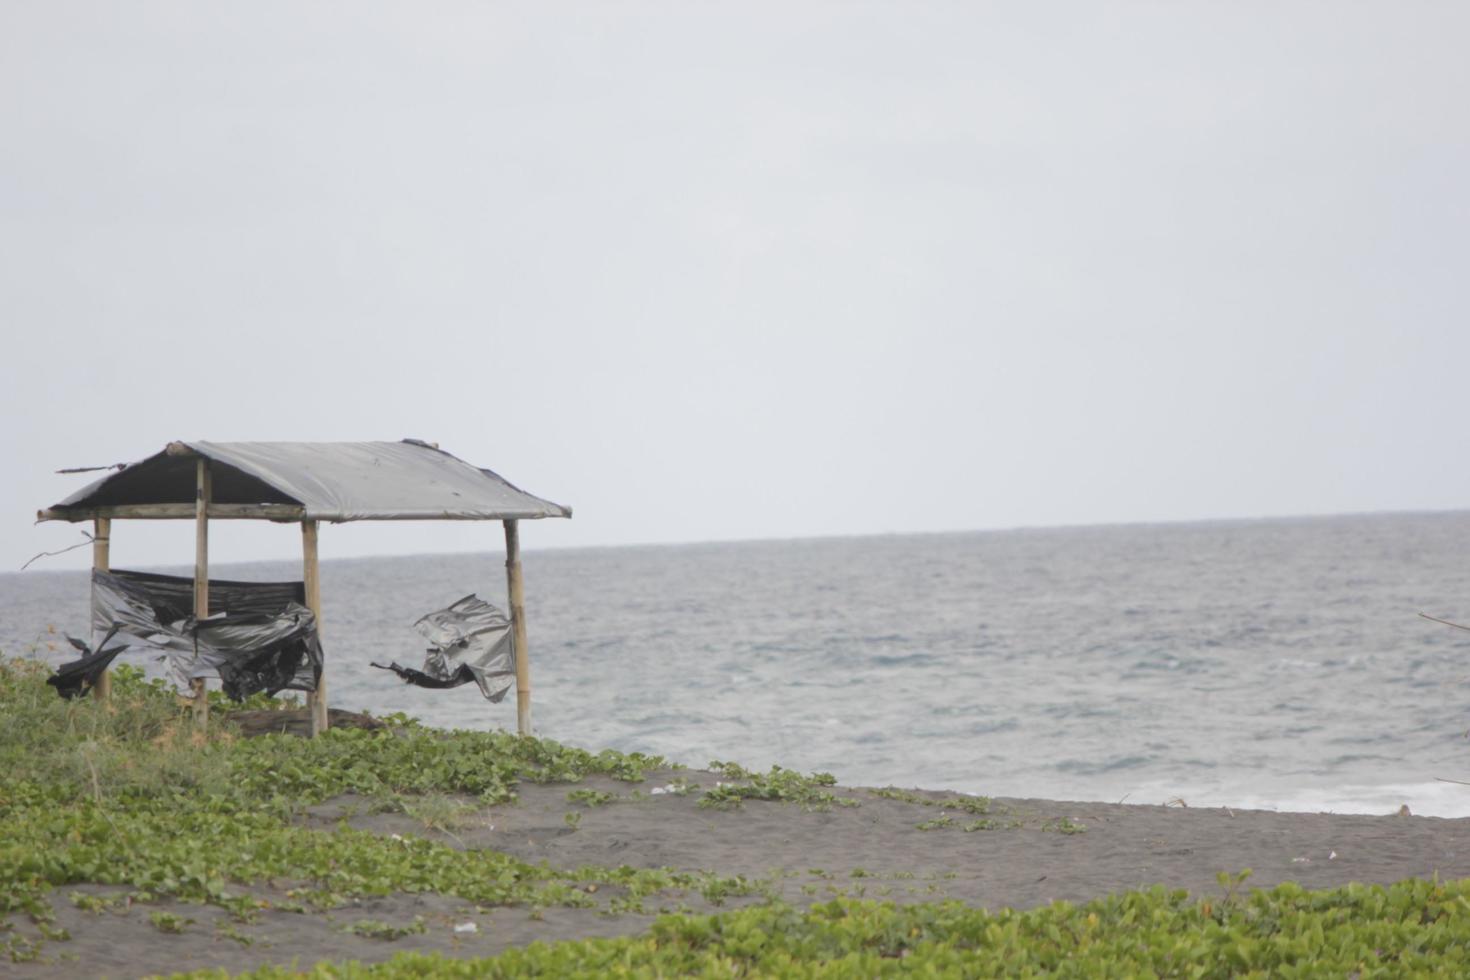 photo of a hut on the beach during the day